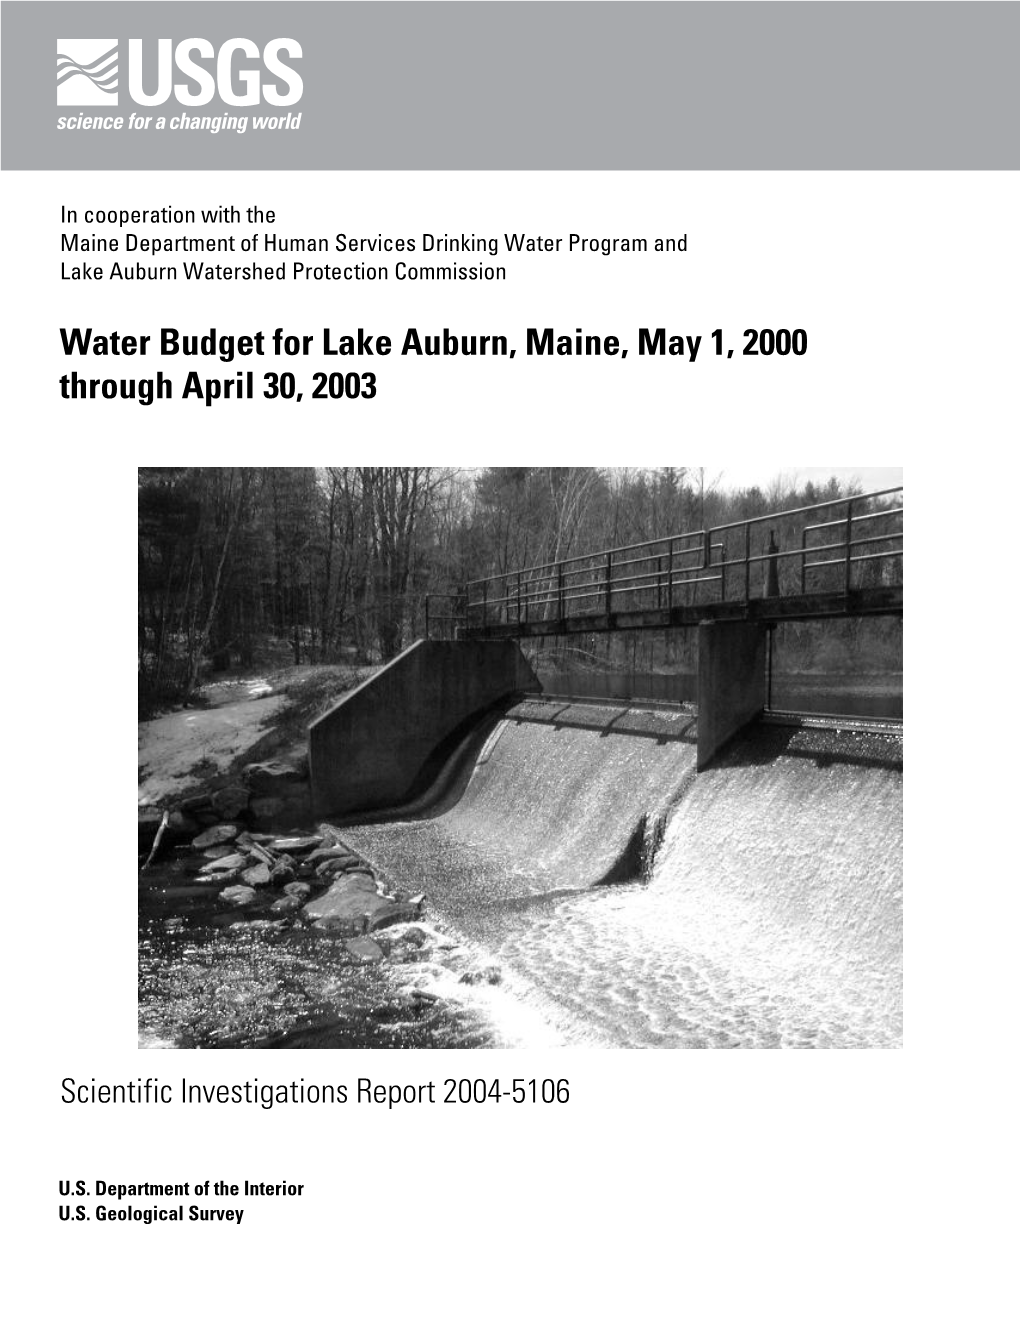 Water Budget for Lake Auburn, Maine, May 1, 2000 Through April 30, 2003